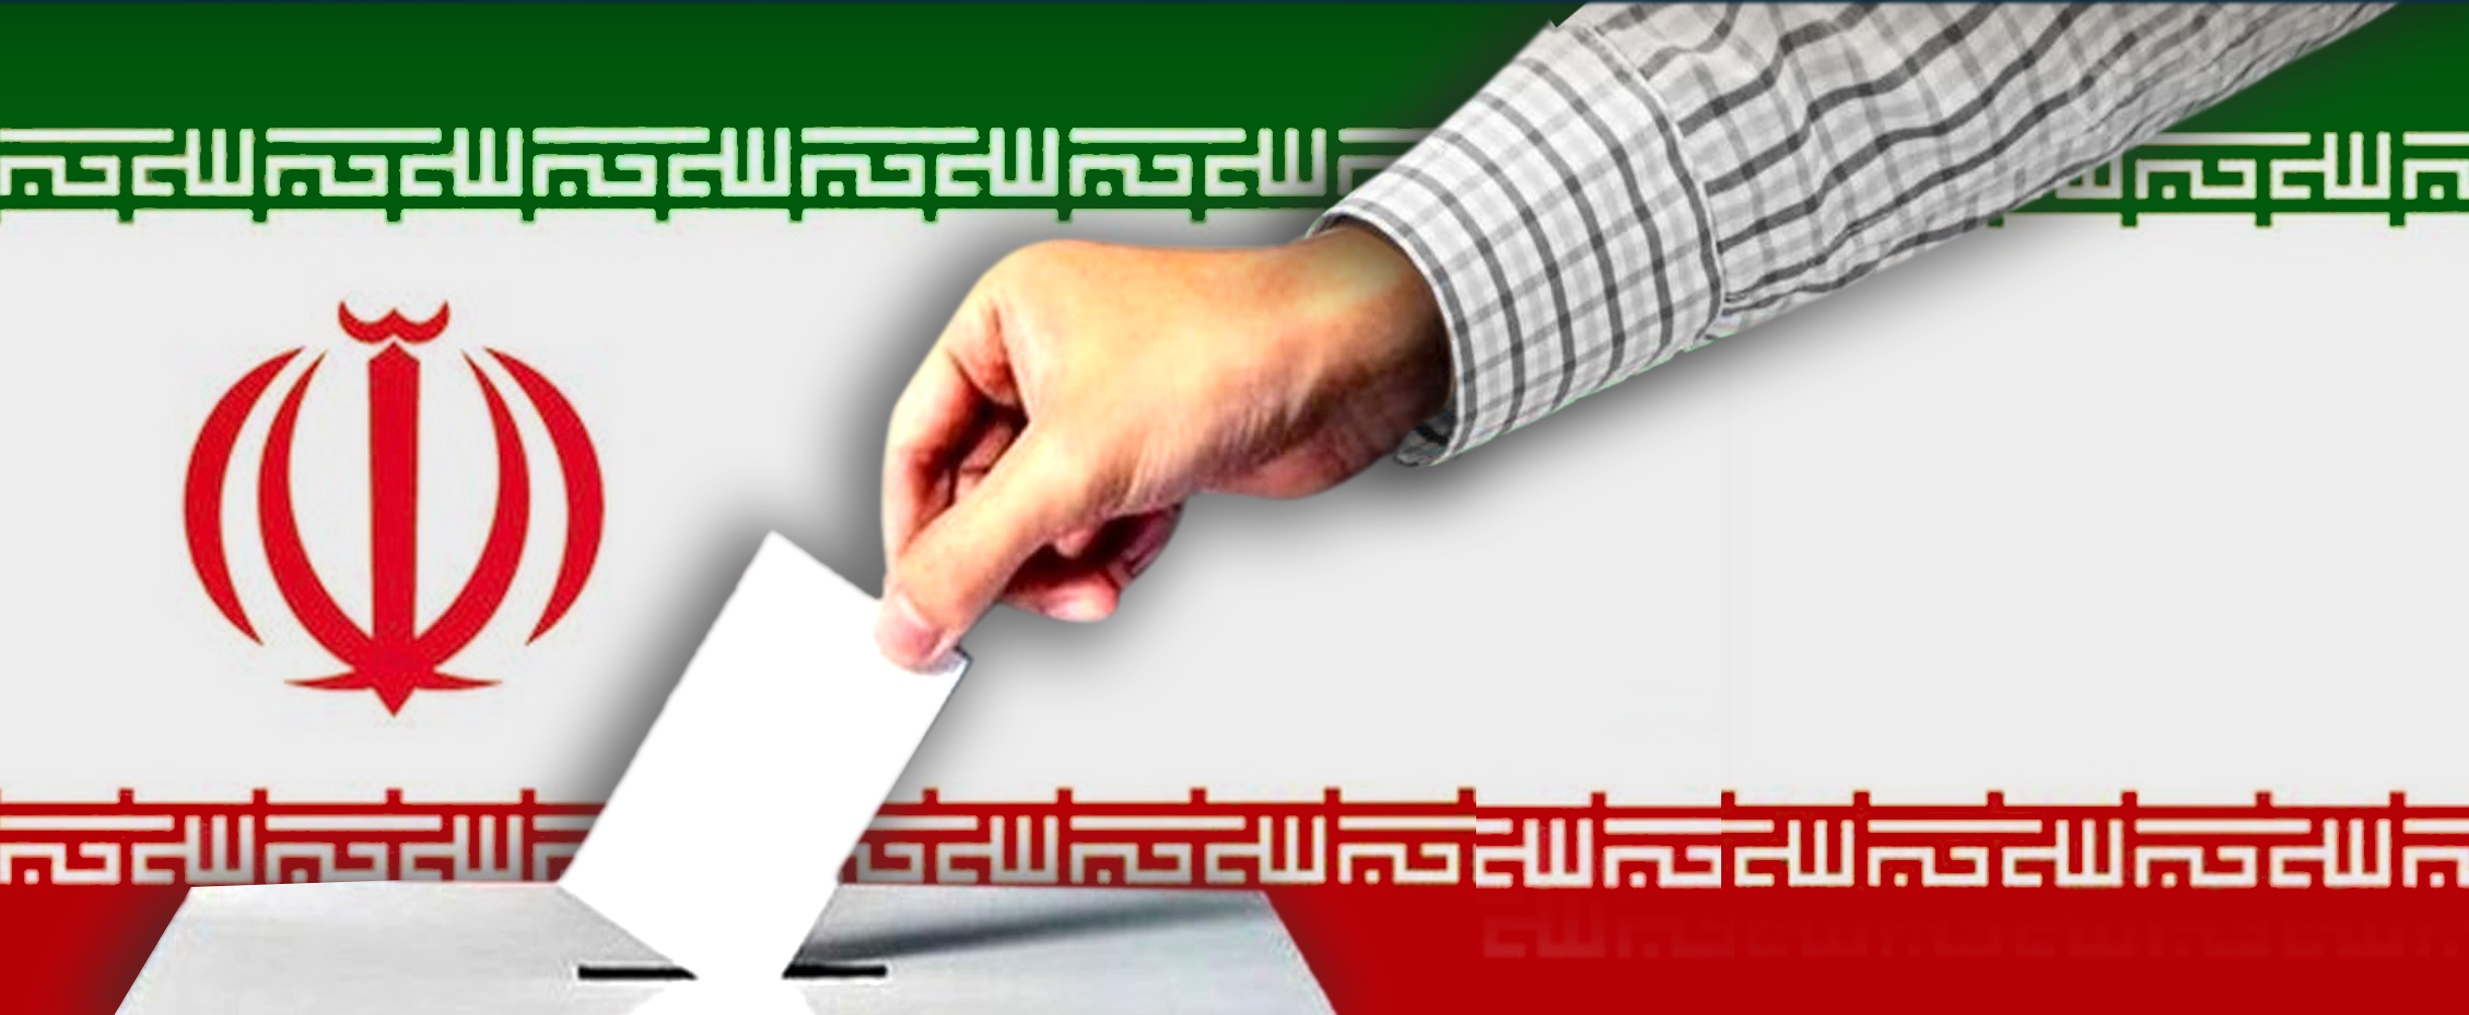 New members of Iran’s parliament, assembly of experts chosen by public vote